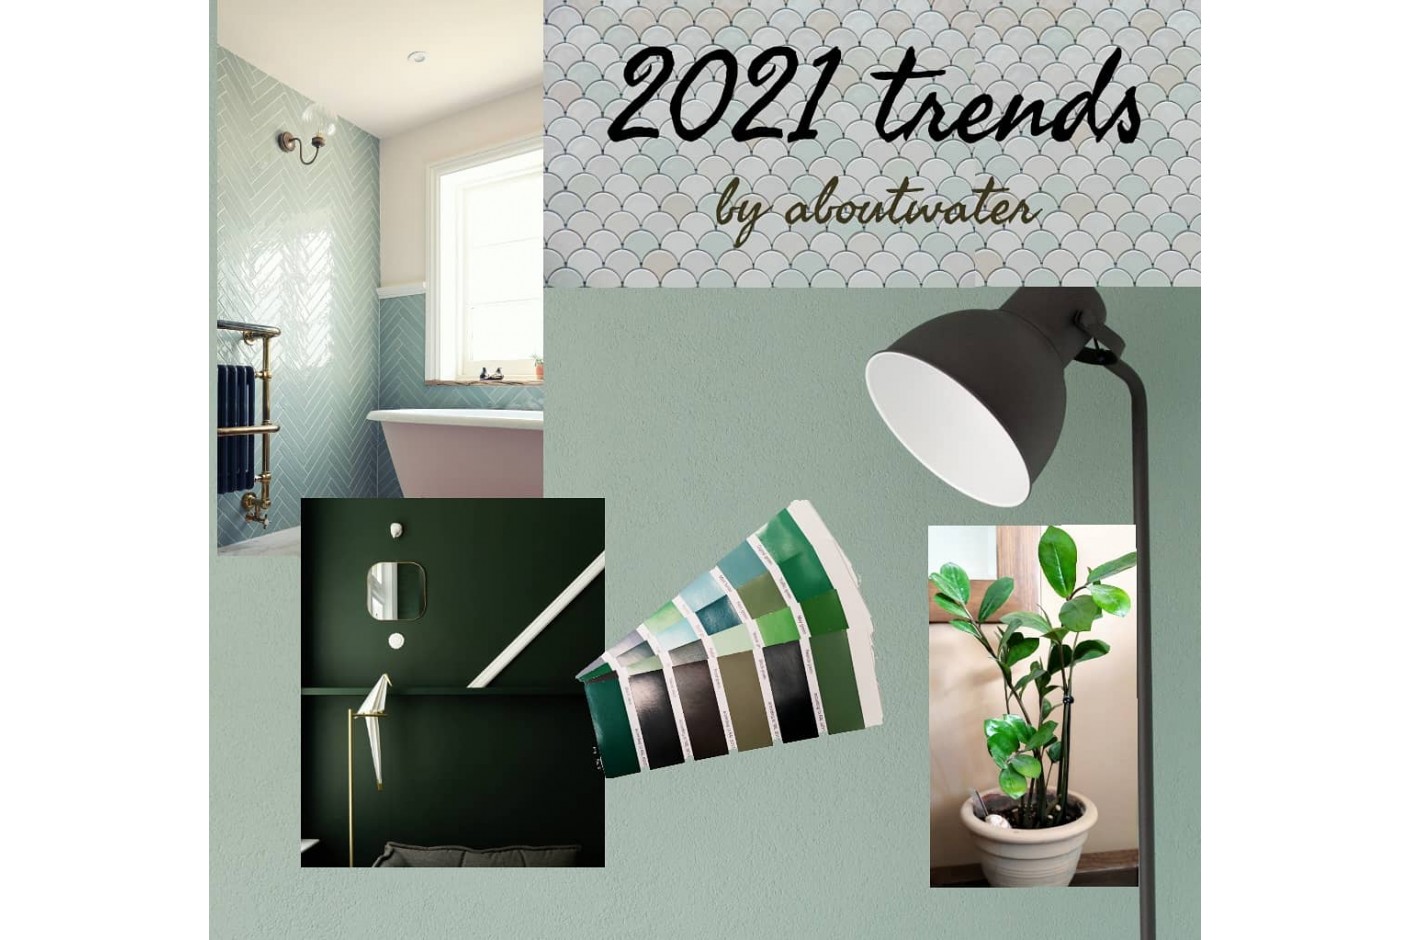 The 5 biggest trends in the house of 2021!